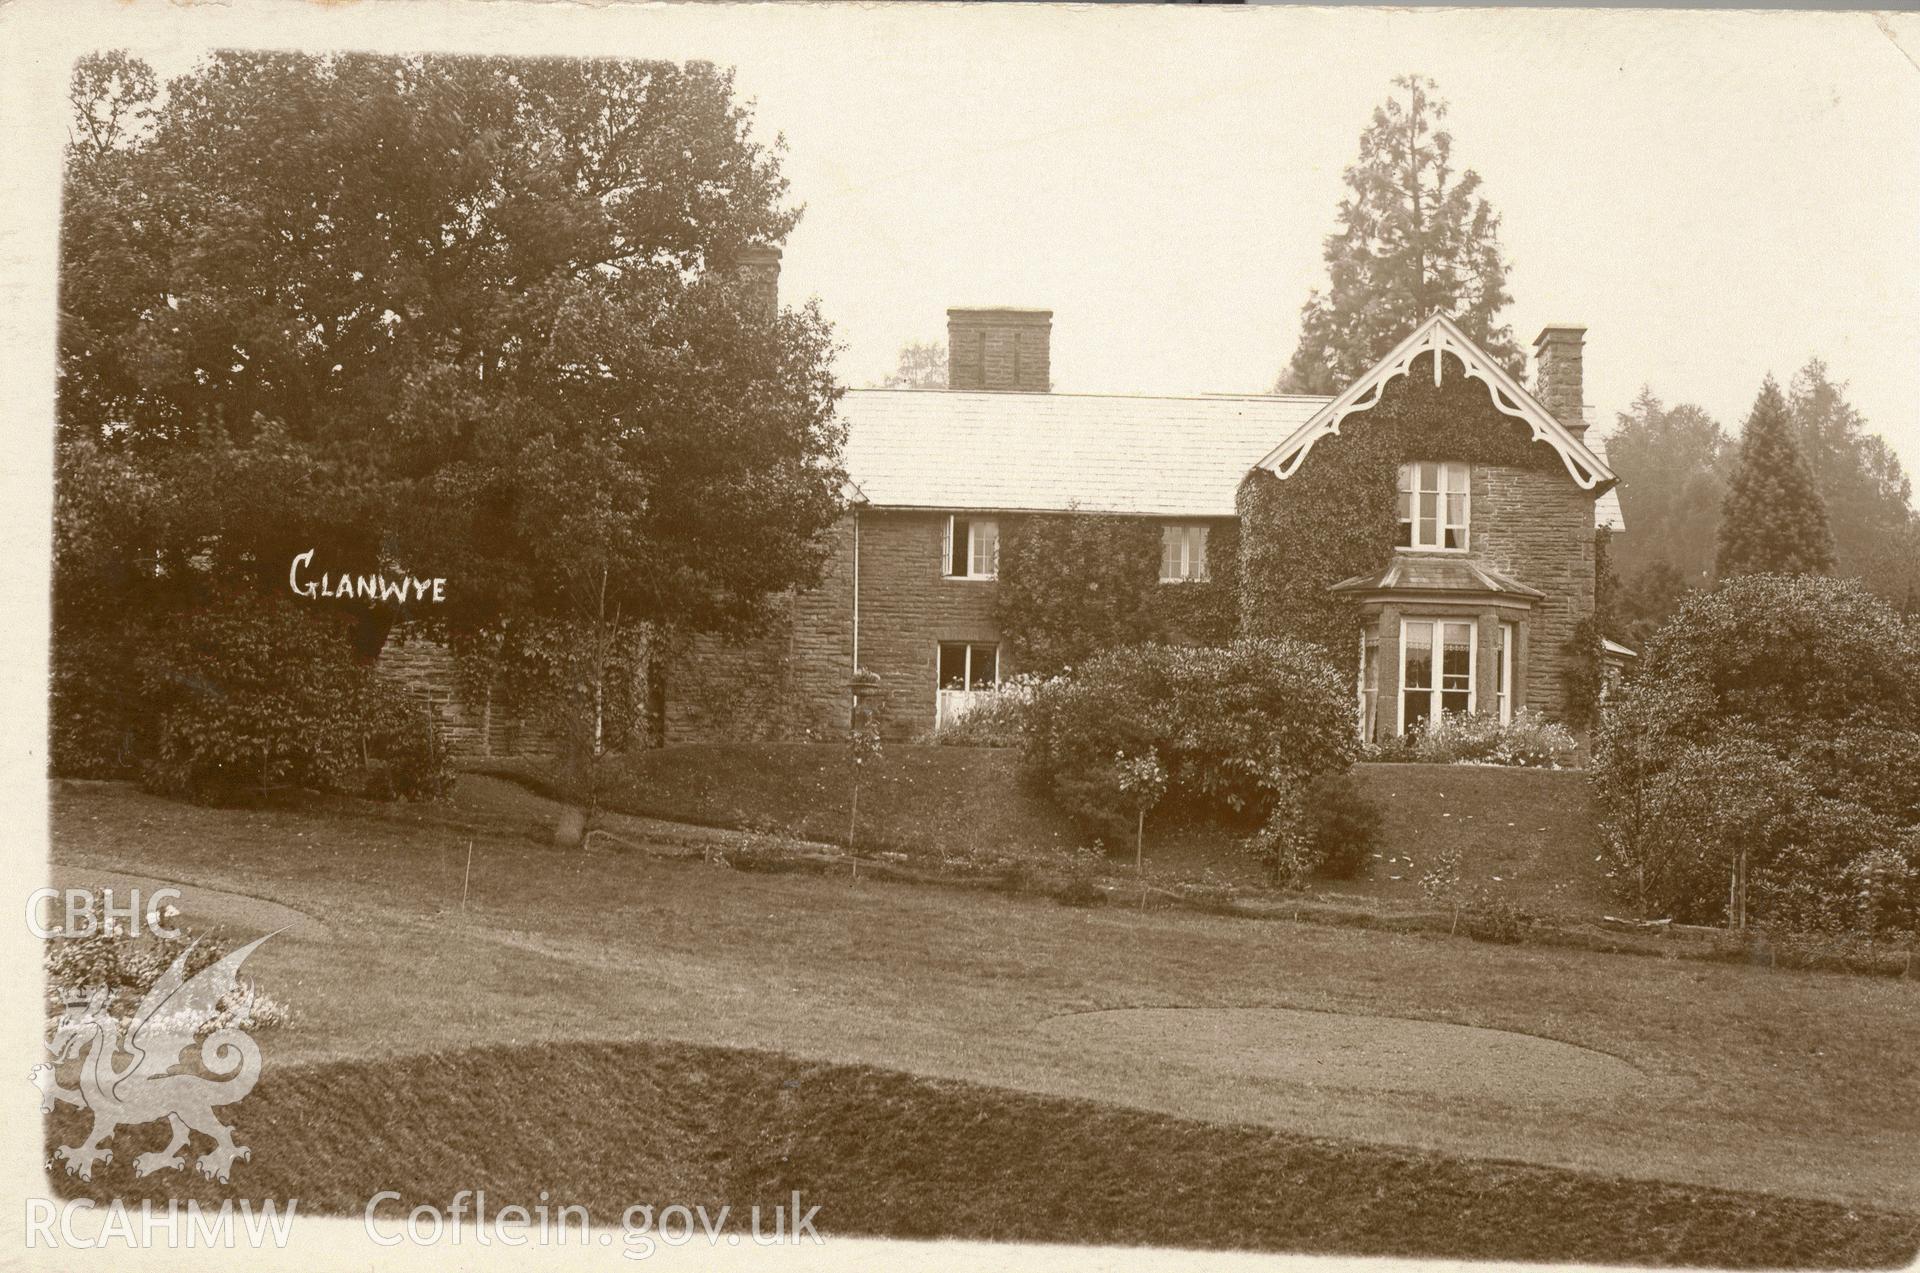 Digitised postcard image of Glanwye House, P.B. Abery, West End Studios, Builth Wells. Produced by Parks and Gardens Data Services, from an original item in the Peter Davis Collection at Parks and Gardens UK. We hold only web-resolution images of this collection, suitable for viewing on screen and for research purposes only. We do not hold the original images, or publication quality scans.